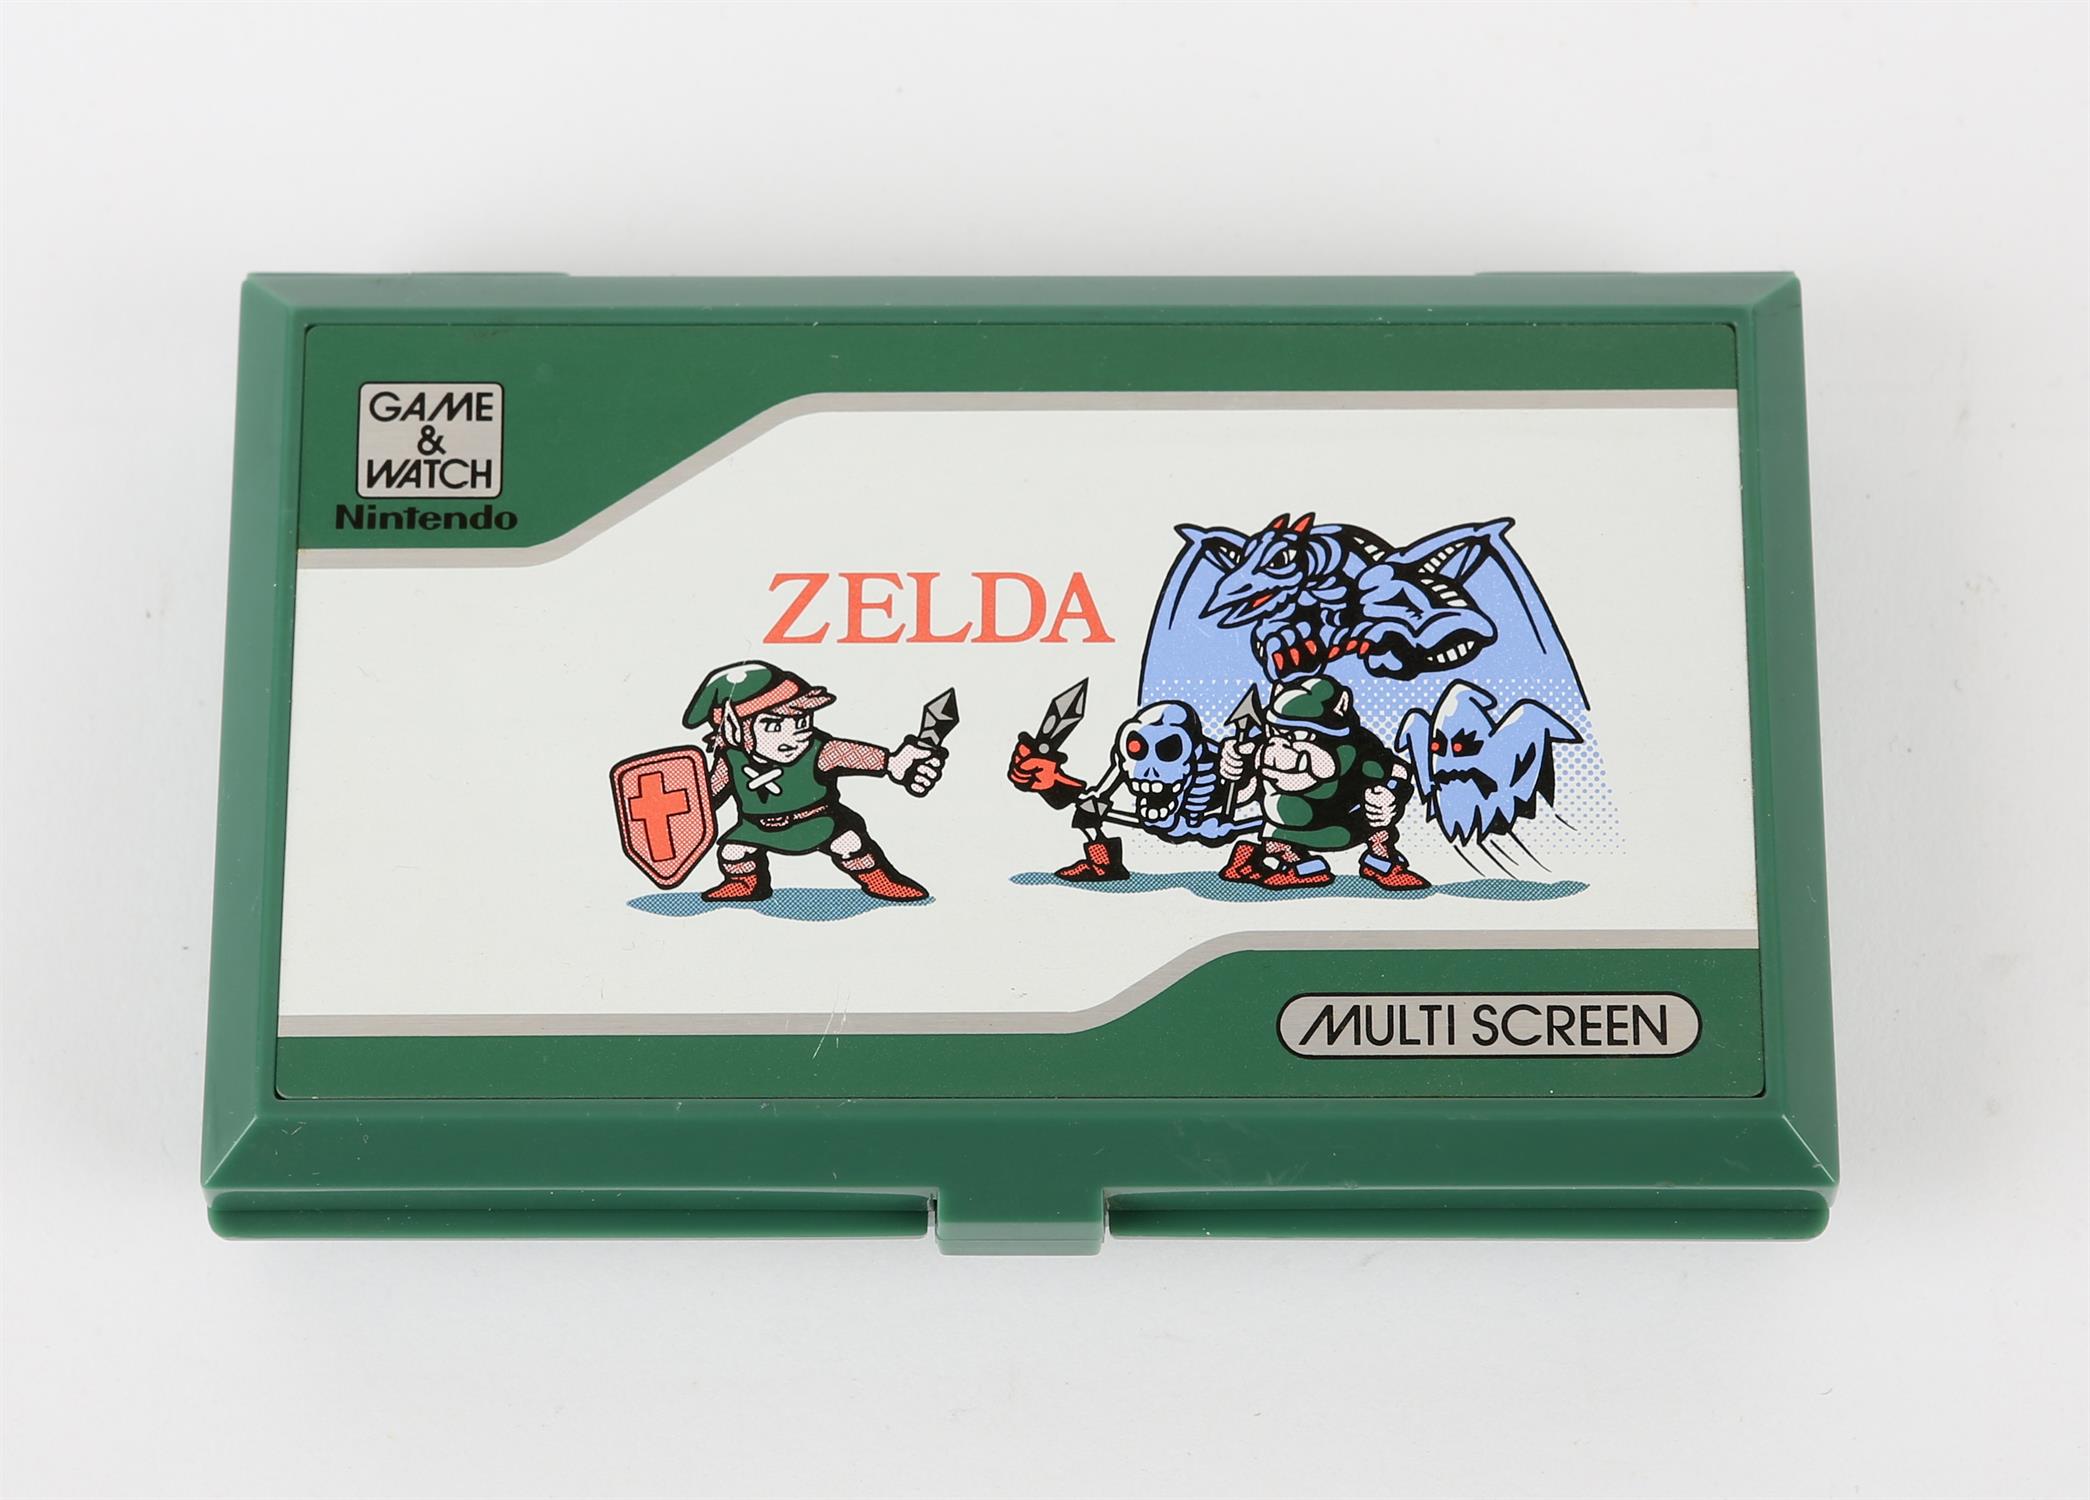 Nintendo Game & Watch Zelda [ZL-65] handheld console Console is unboxed and untested - Bild 2 aus 2